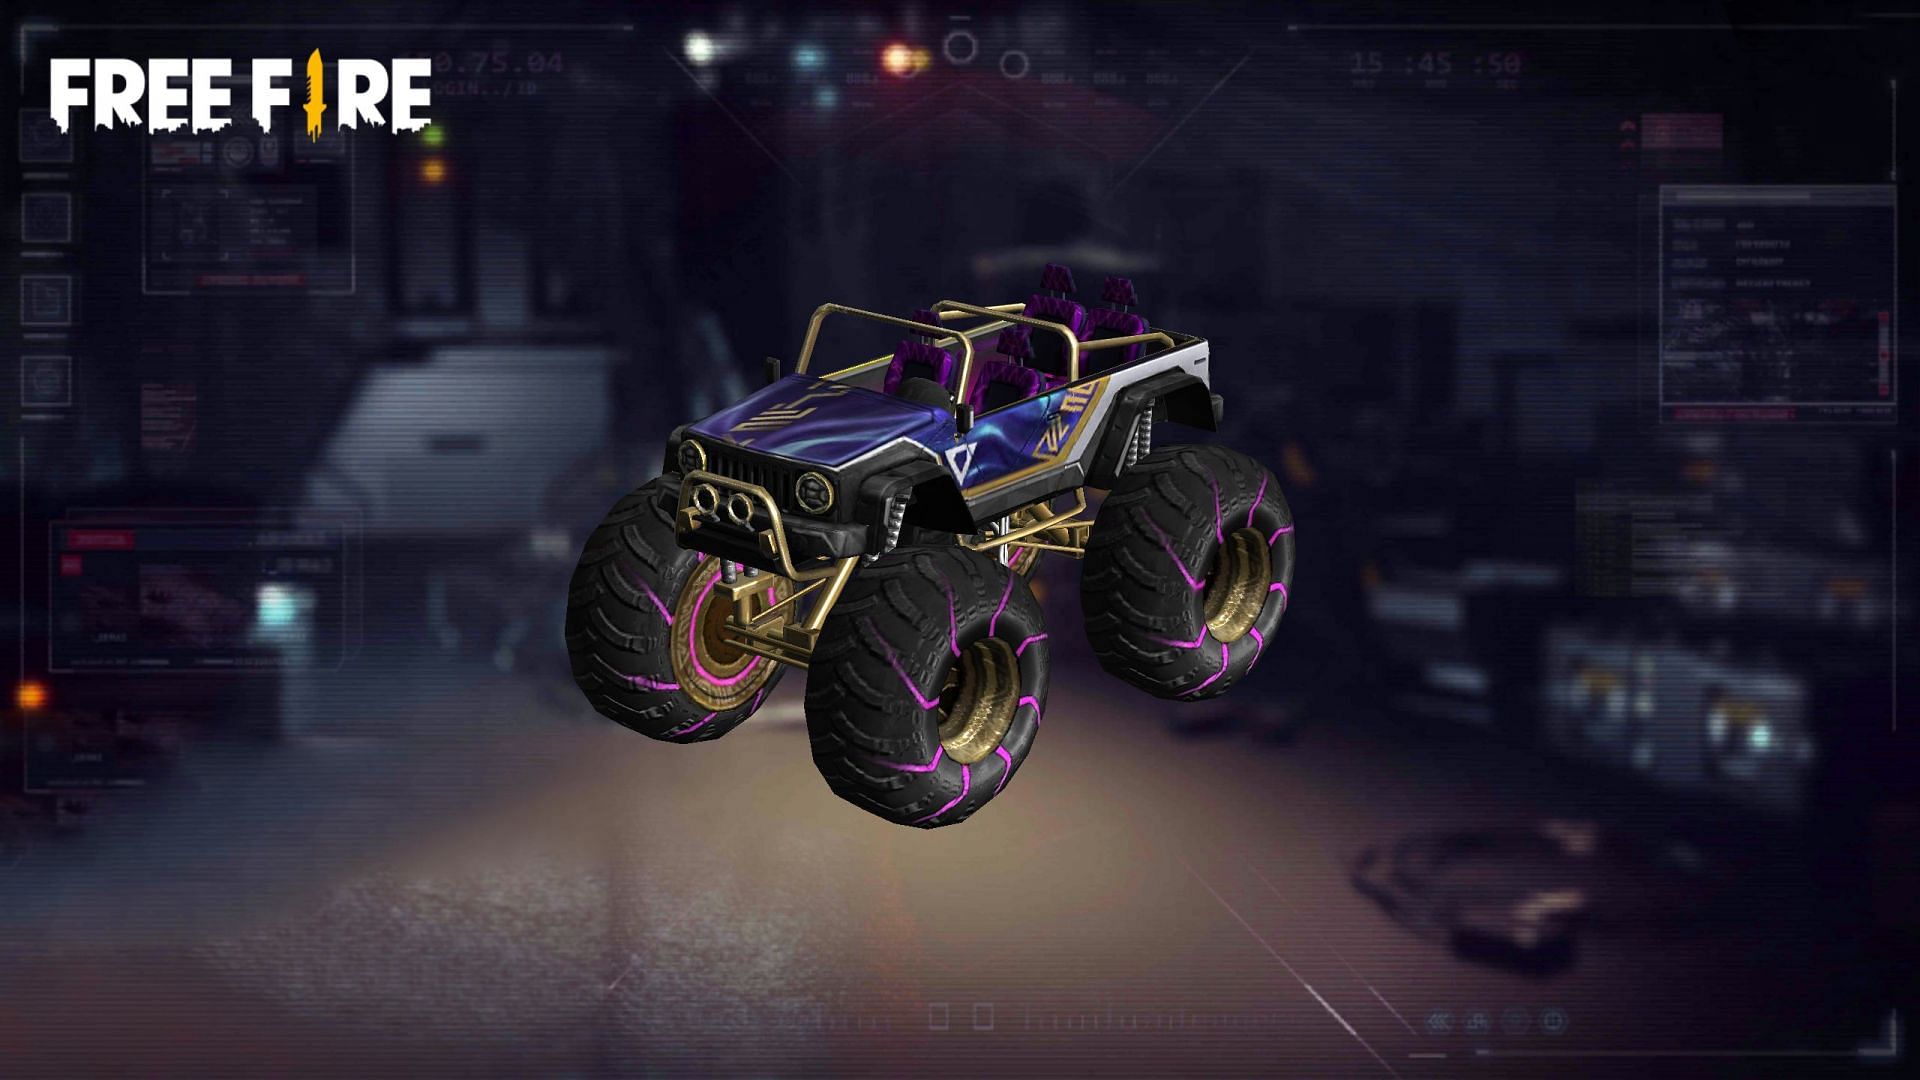 The free monster truck skin in Free Fire (Image via Garena)